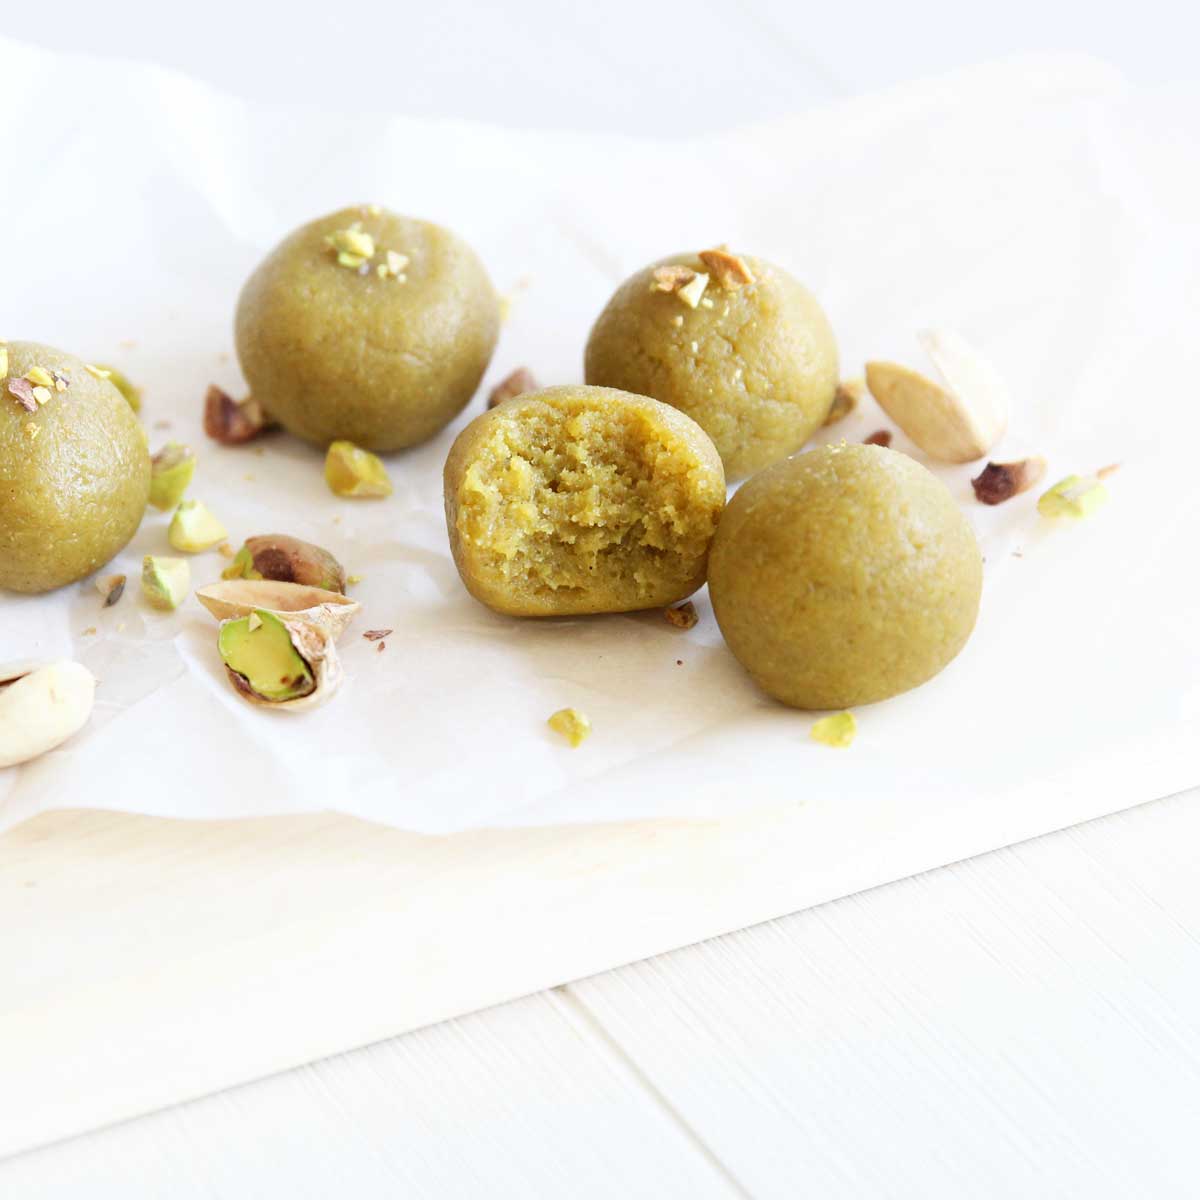 Keto Pistachio Cheesecake Protein Balls (Low Carb Energy Bites made with Collagen Peptides) - Canned Chickpea Yeast Bread